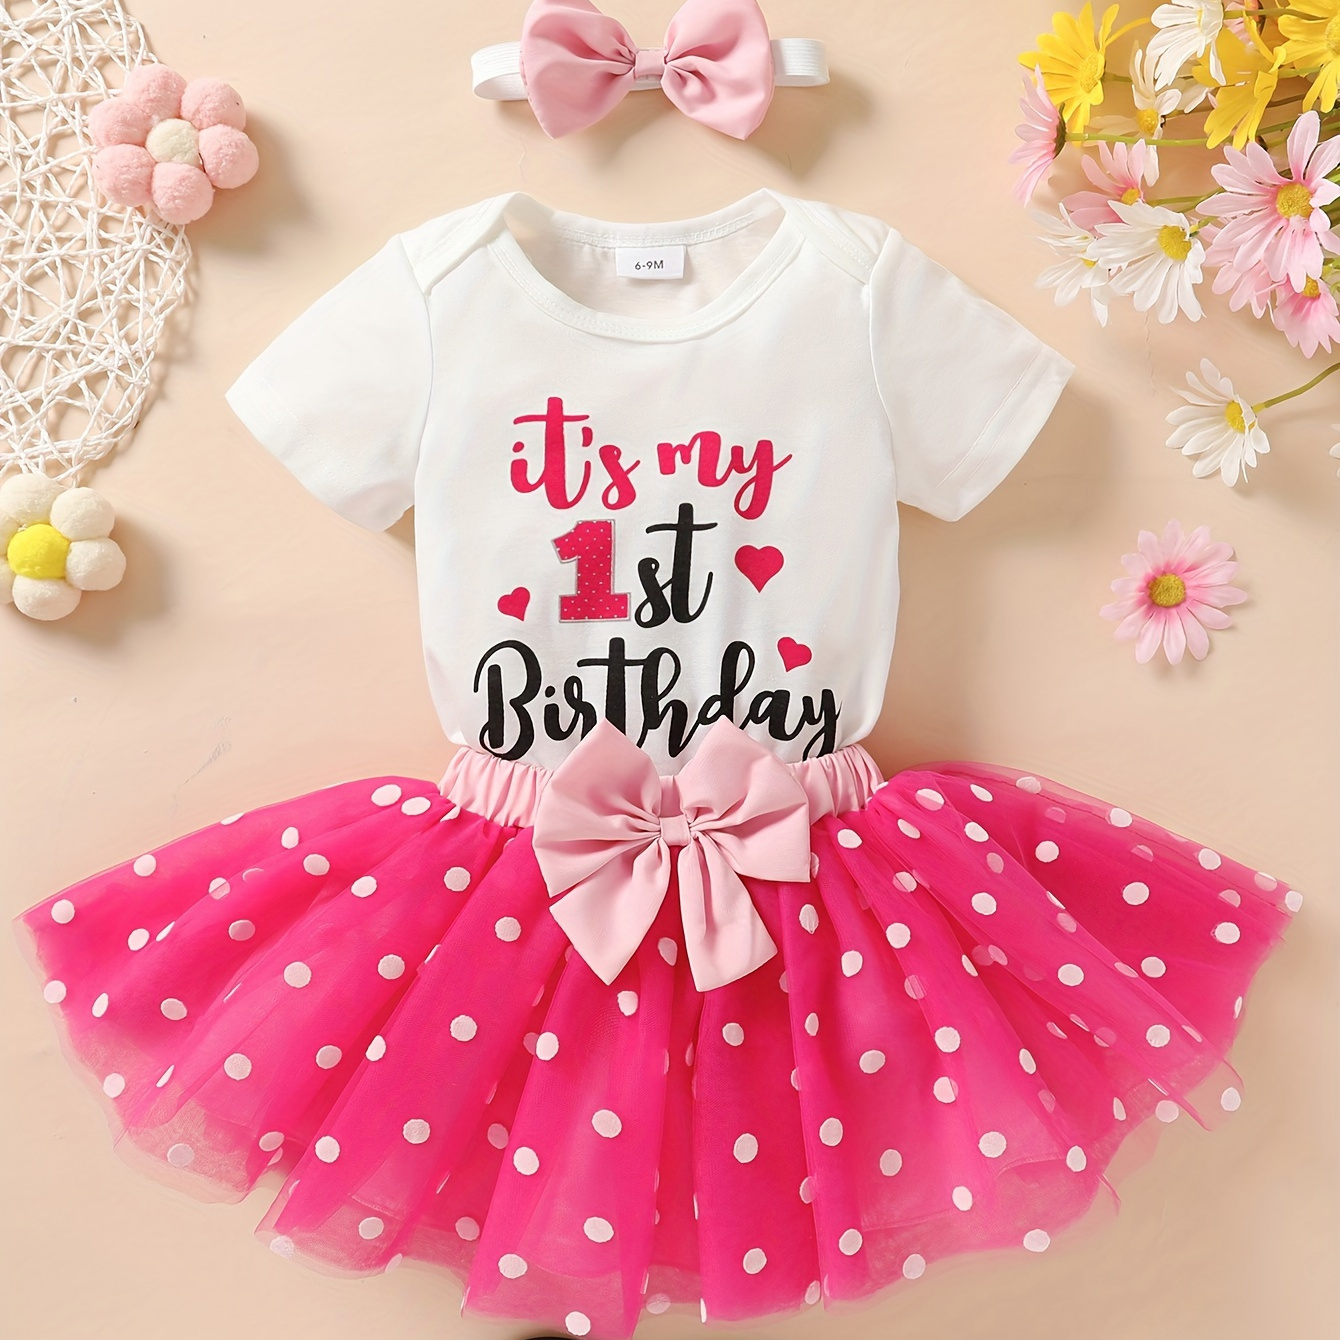 

Baby's "it's My 1st Birthday" Print 2pcs Lovely Outfit, Bodysuit & Bowknot Hairband & Polka Dots Pattern Mesh Tutu Skirt Set, Toddler & Infant Girl's Clothes For Daily/holiday/party